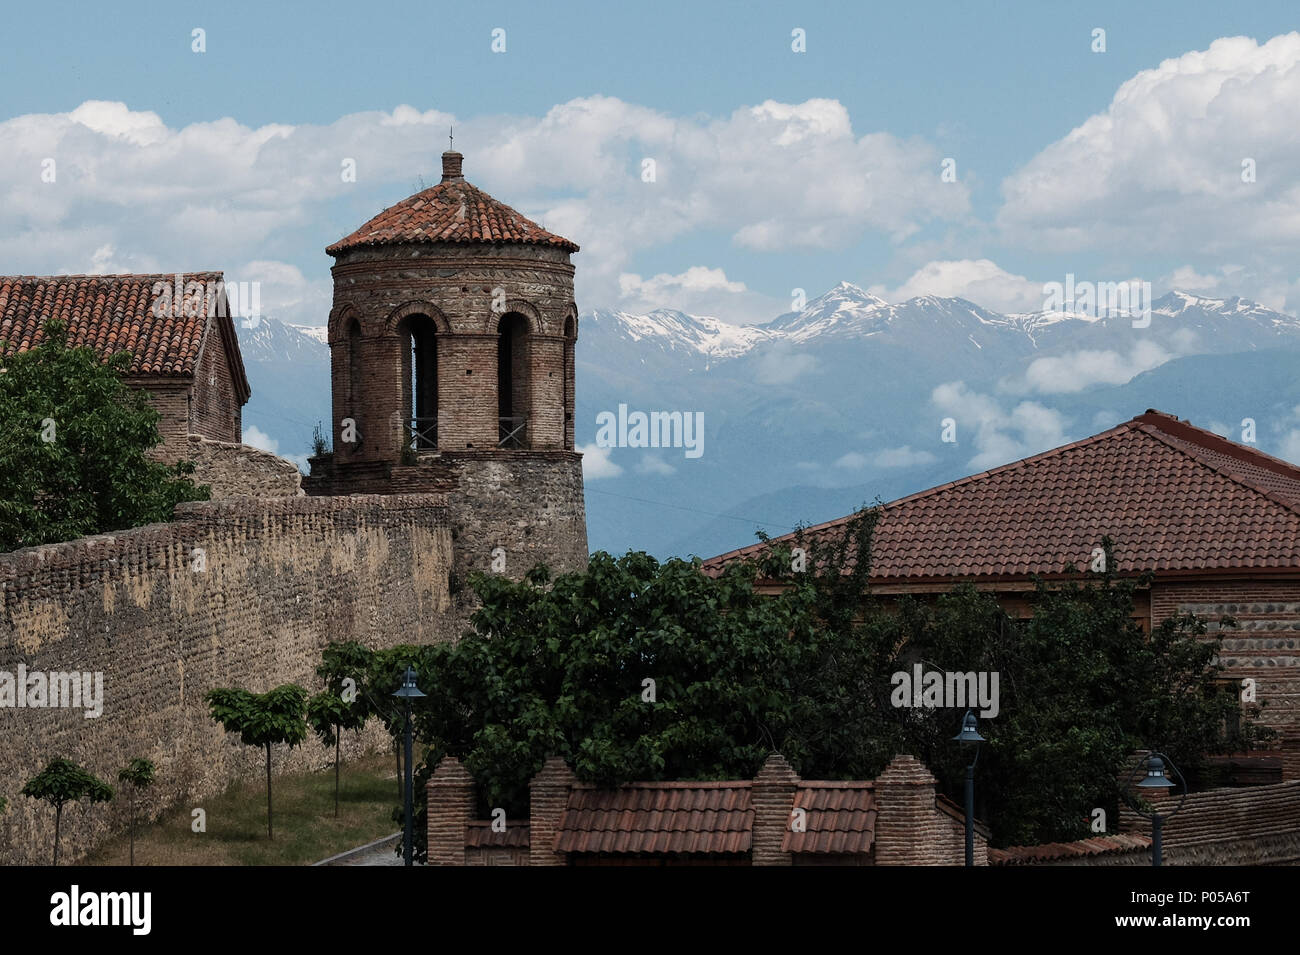 Ancient fortifications surround the Castle of King Erekle II in Telavi, Georgia. Stock Photo